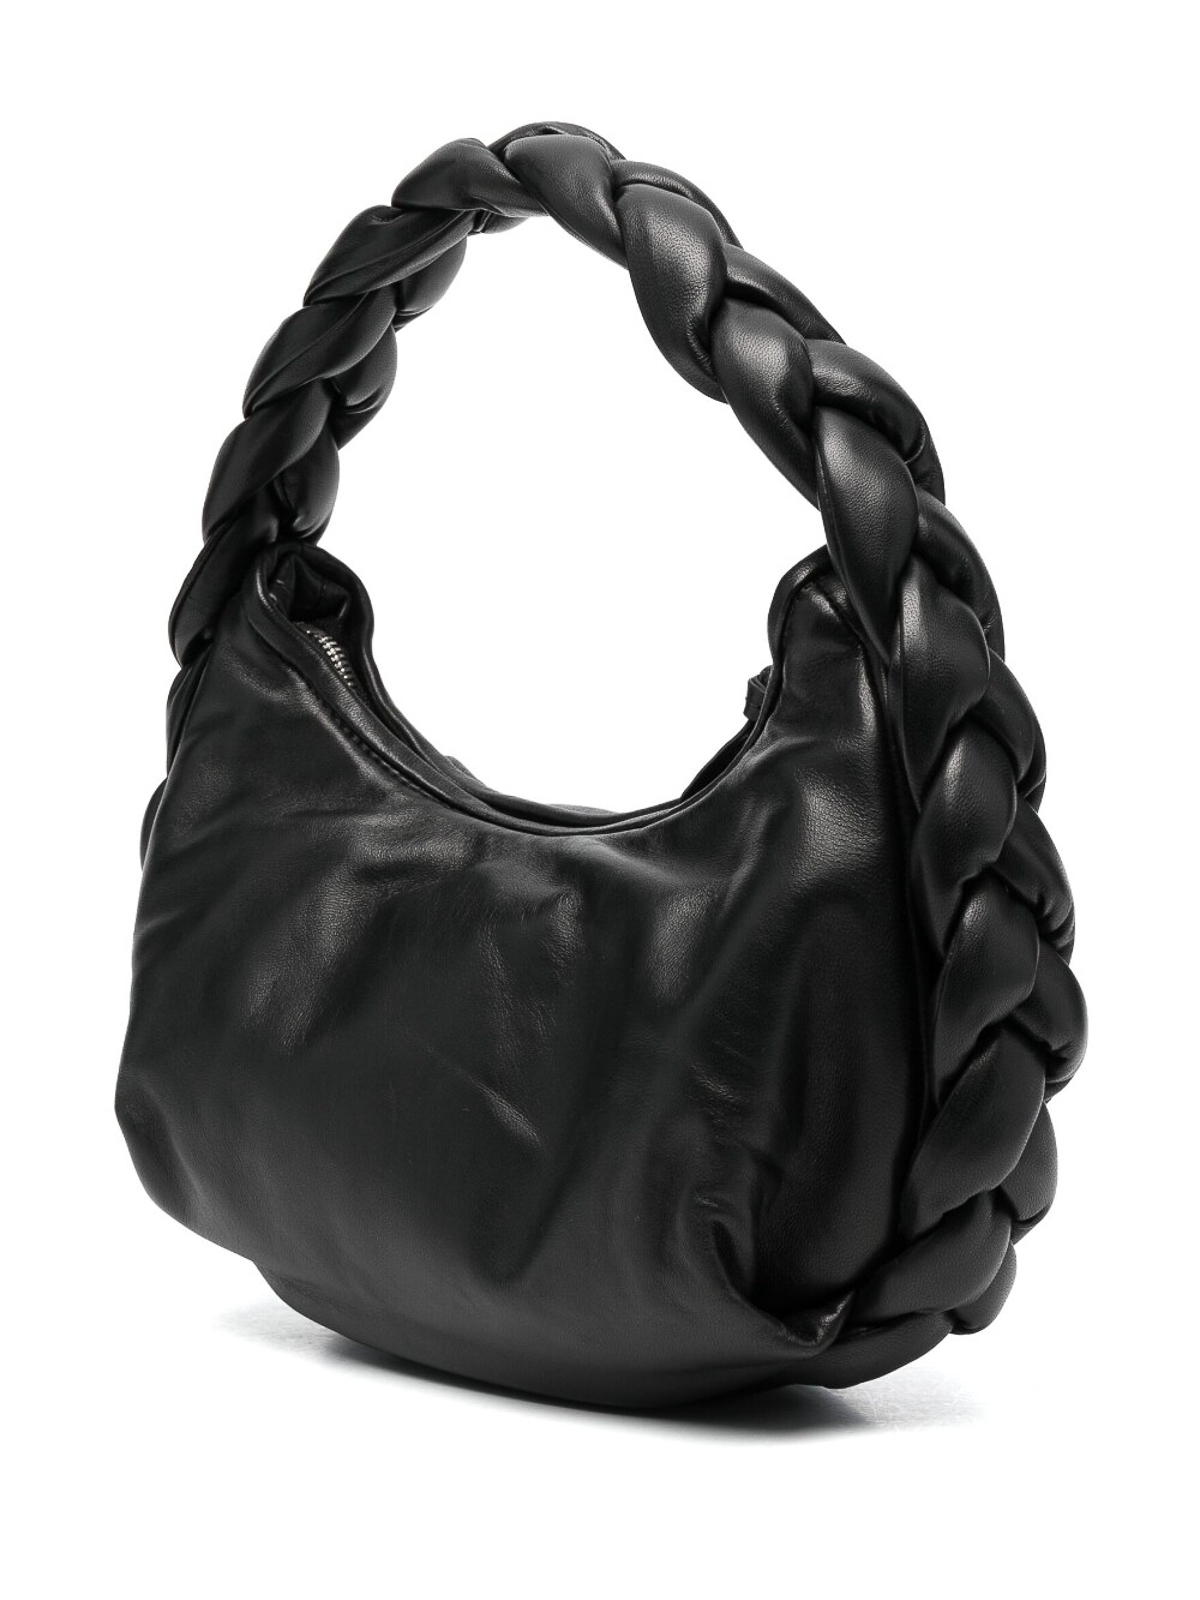 Black Leather Braided Handle Tote Bag with Pouch